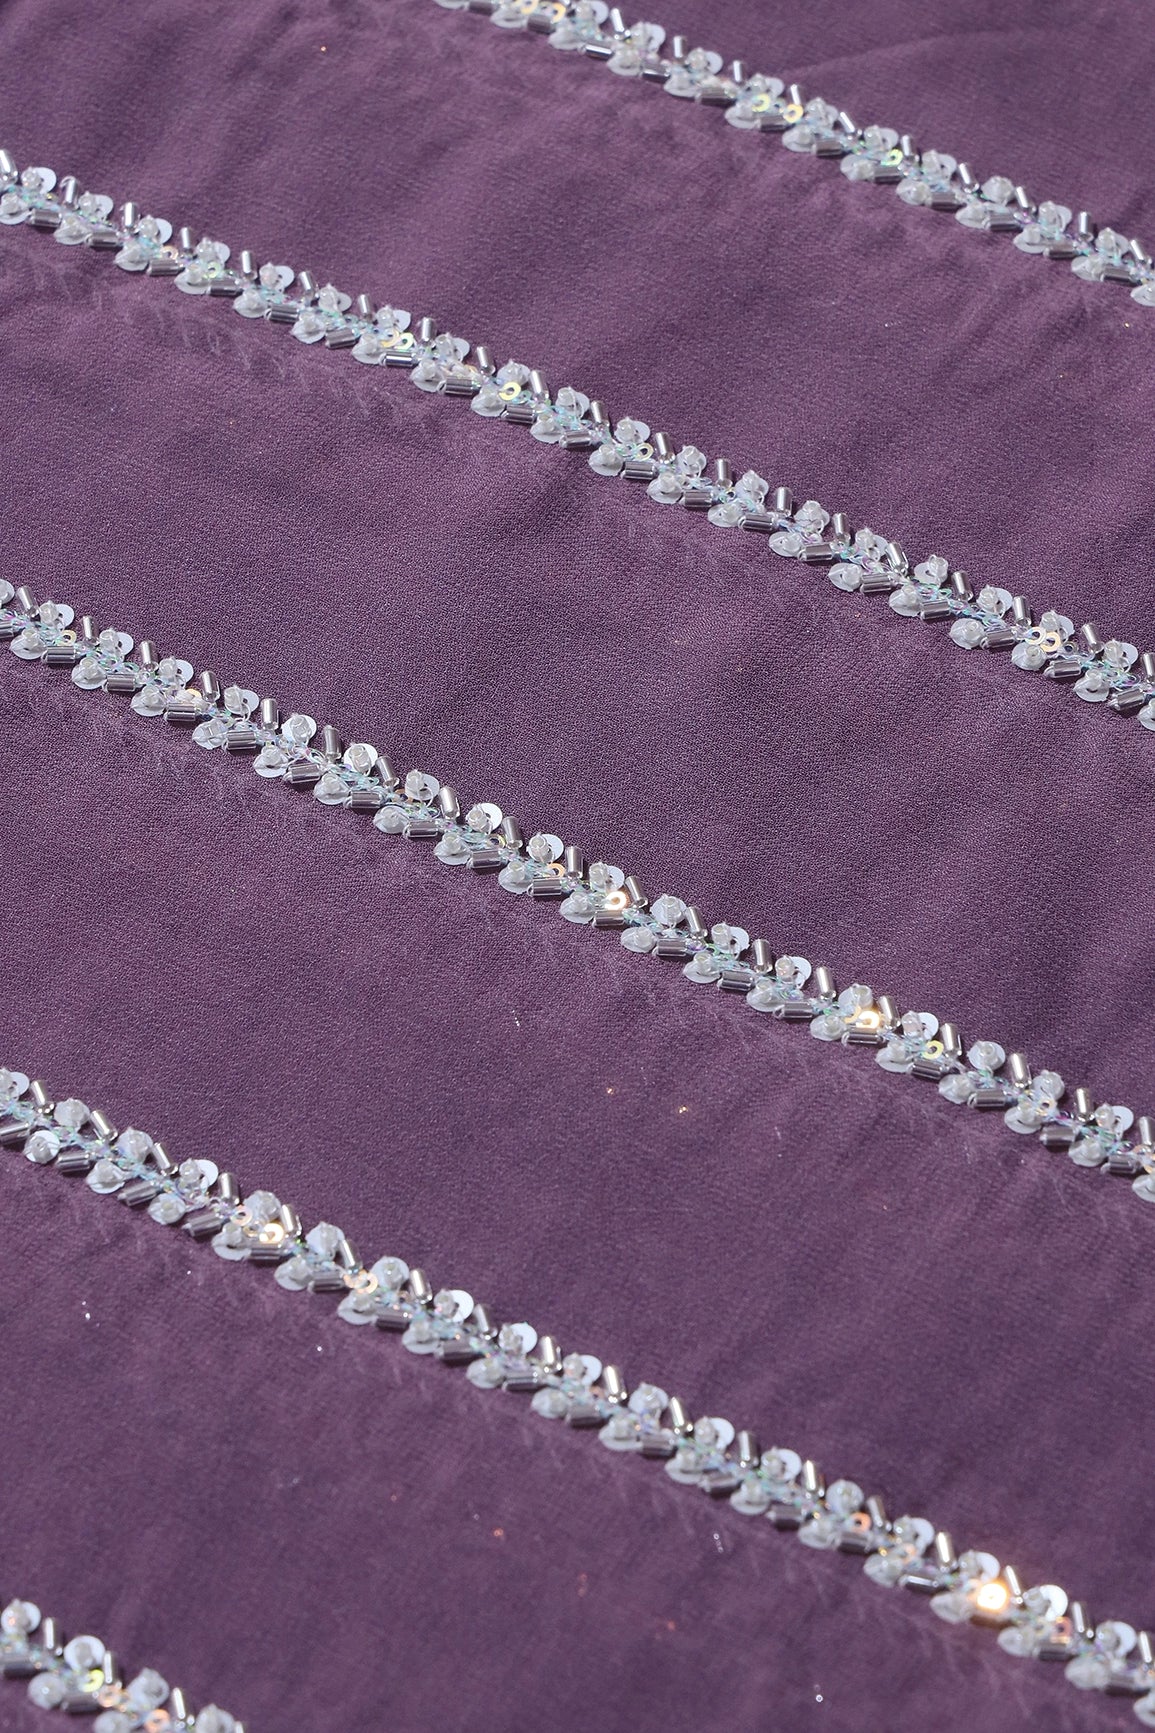 Silver Beads With Sequins Beautiful Stripes Handwork Embroidery On Viola Purple Viscose Georgette Fabric